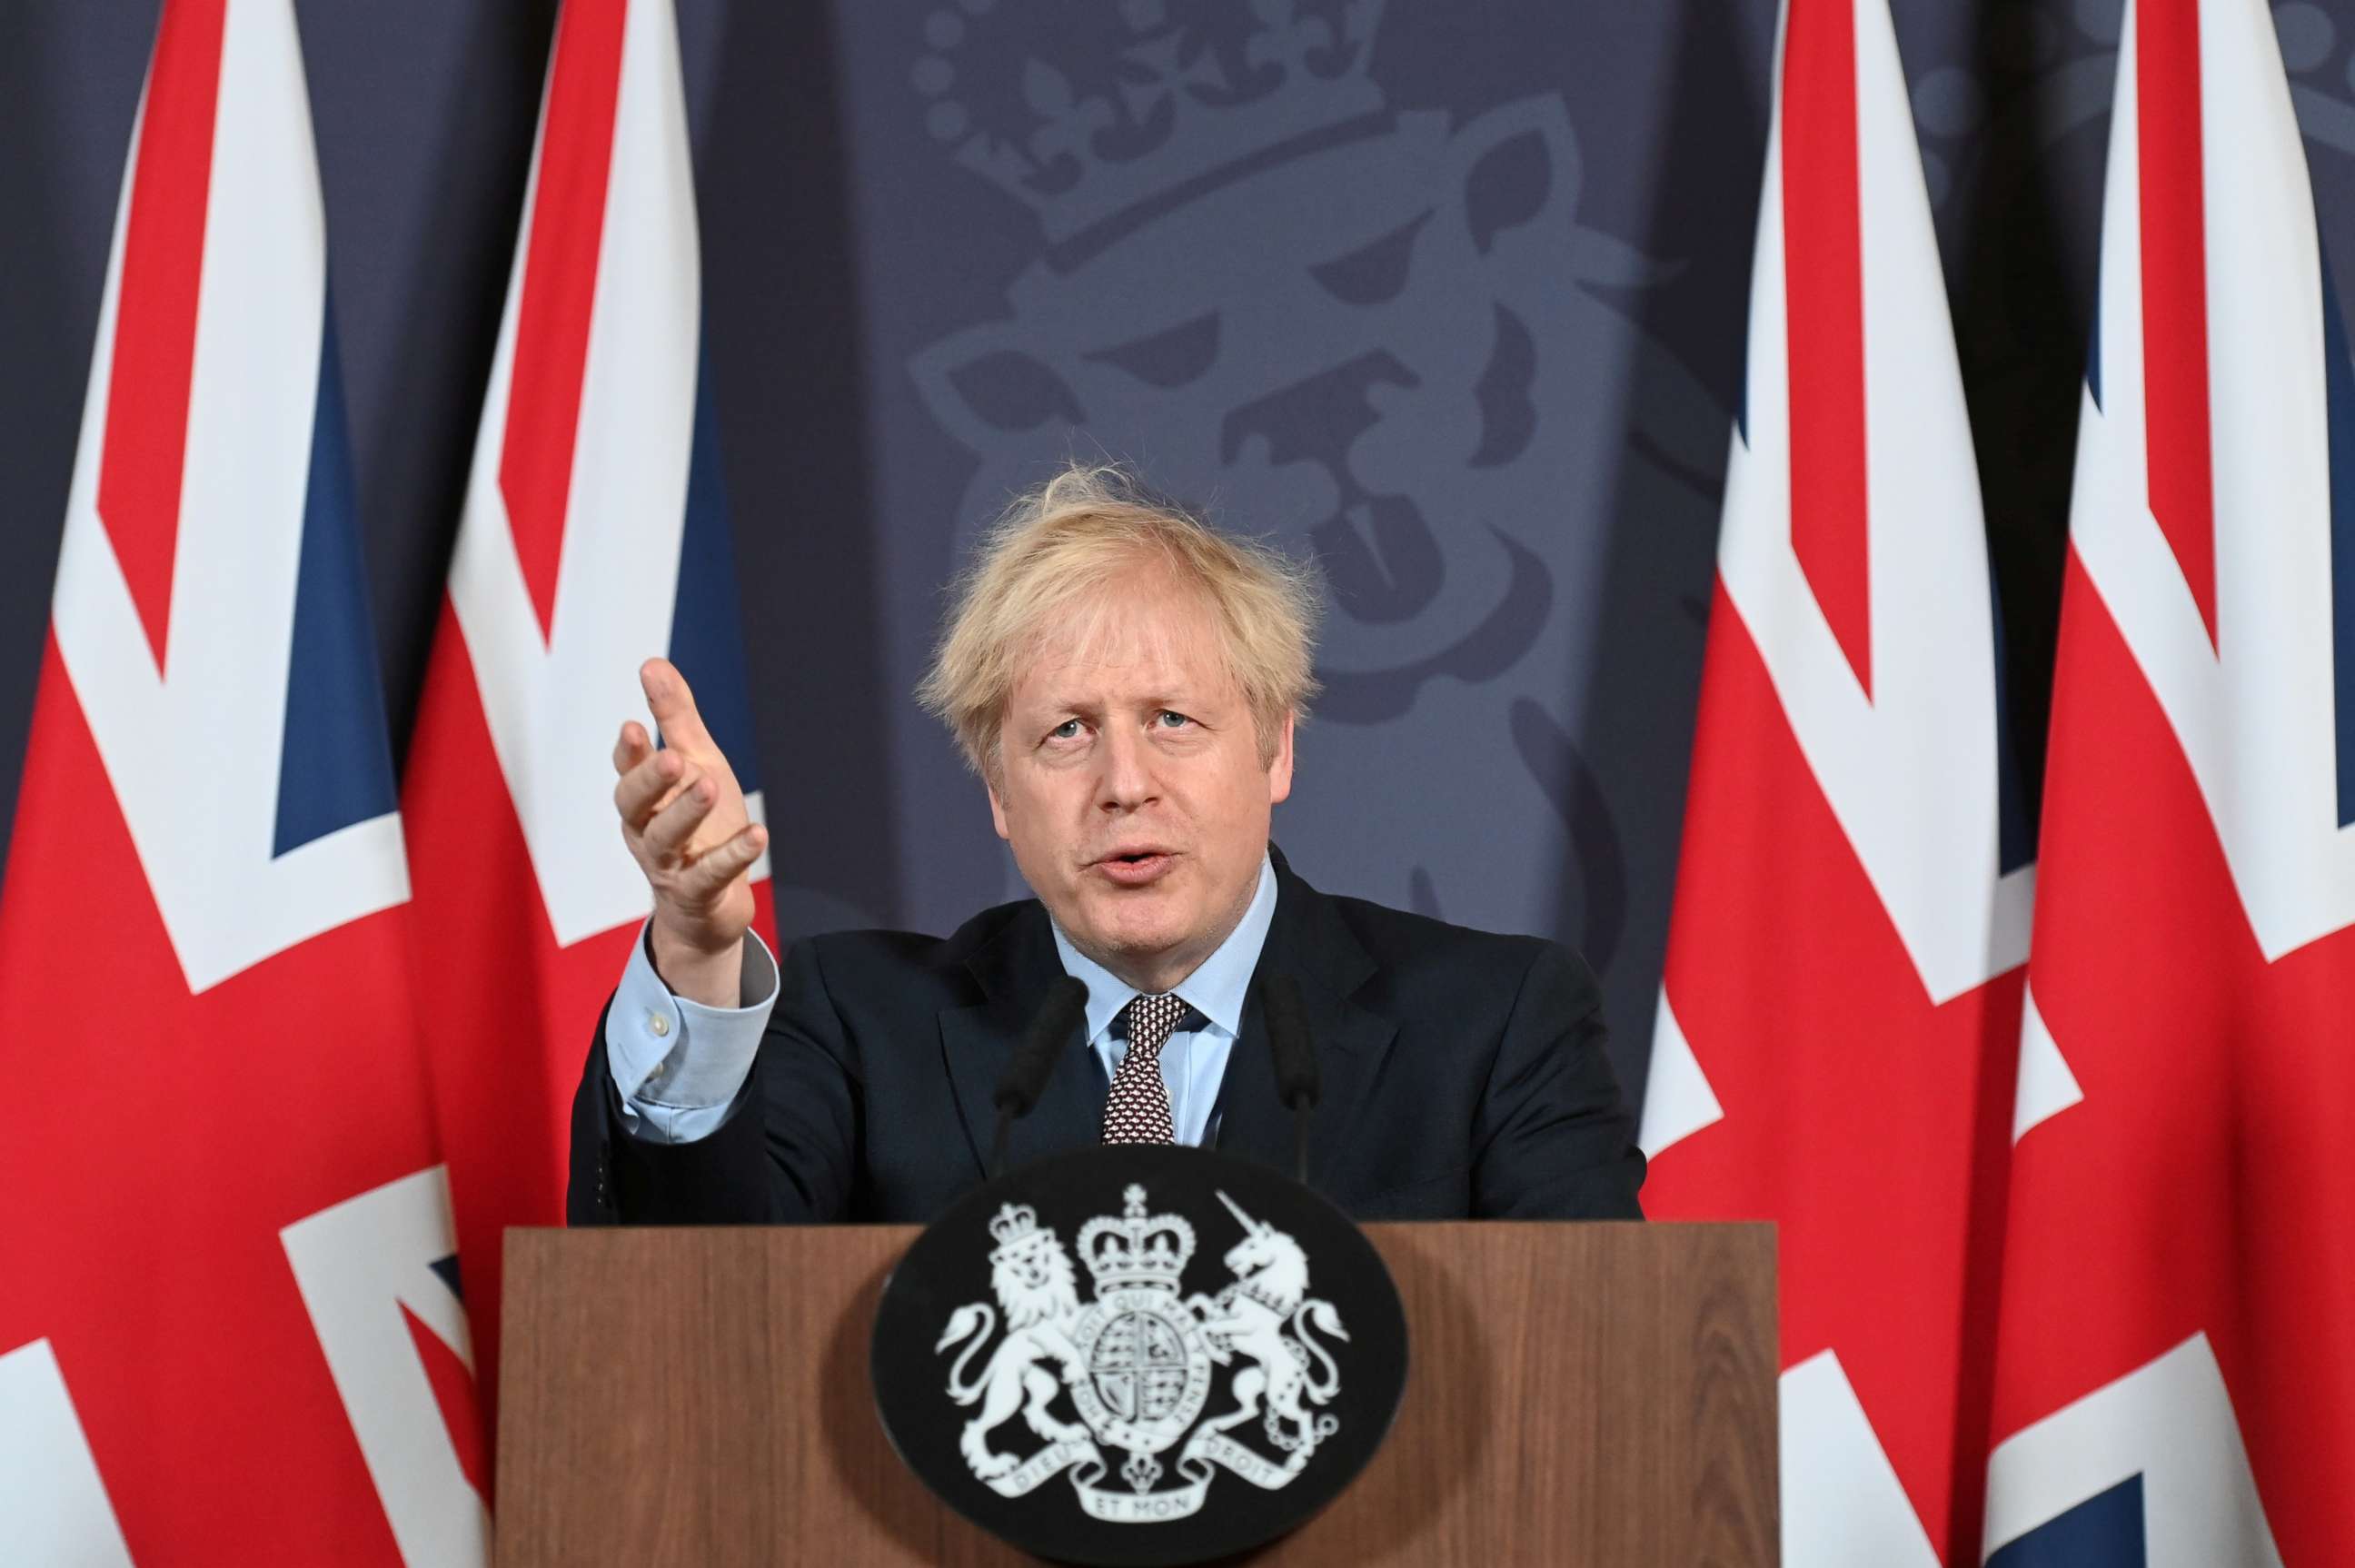 PHOTO: British Prime Minister Boris Johnson holds a news conference in Downing Street on the outcome of the Brexit negotiations, in London, Dec. 24, 2020.